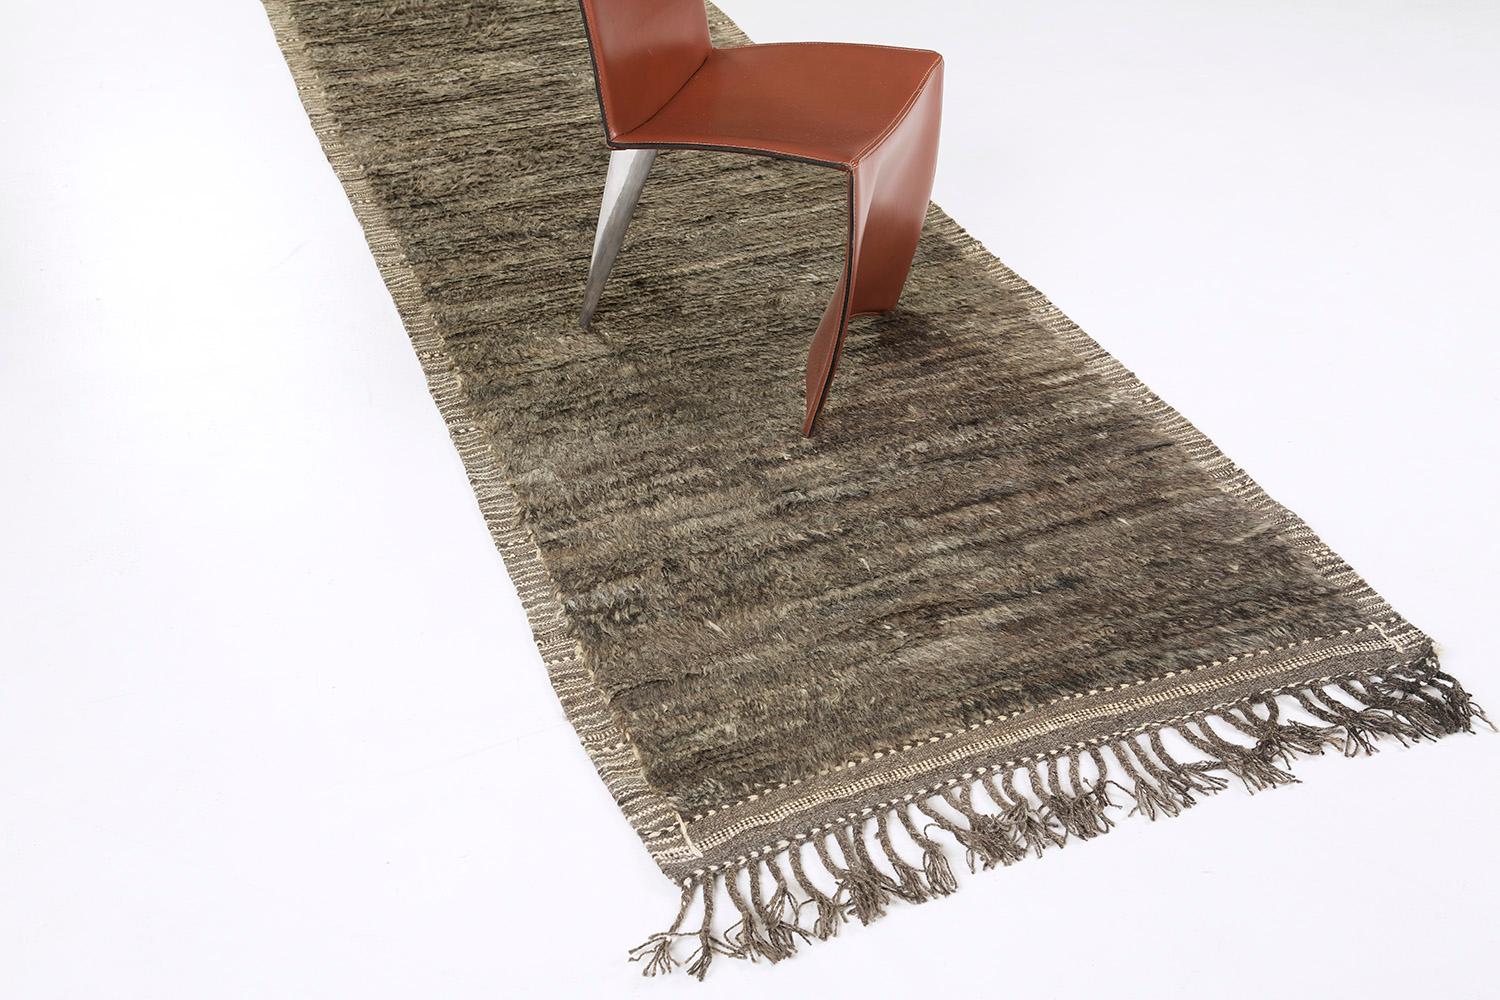 The perfect sandy color handwoven wool area rug to accommodate many spaces. This timeless design was built to withstand high amounts of foot traffic. The Haute Bohemian collection is designed in Los Angeles and named for the winds knitting together